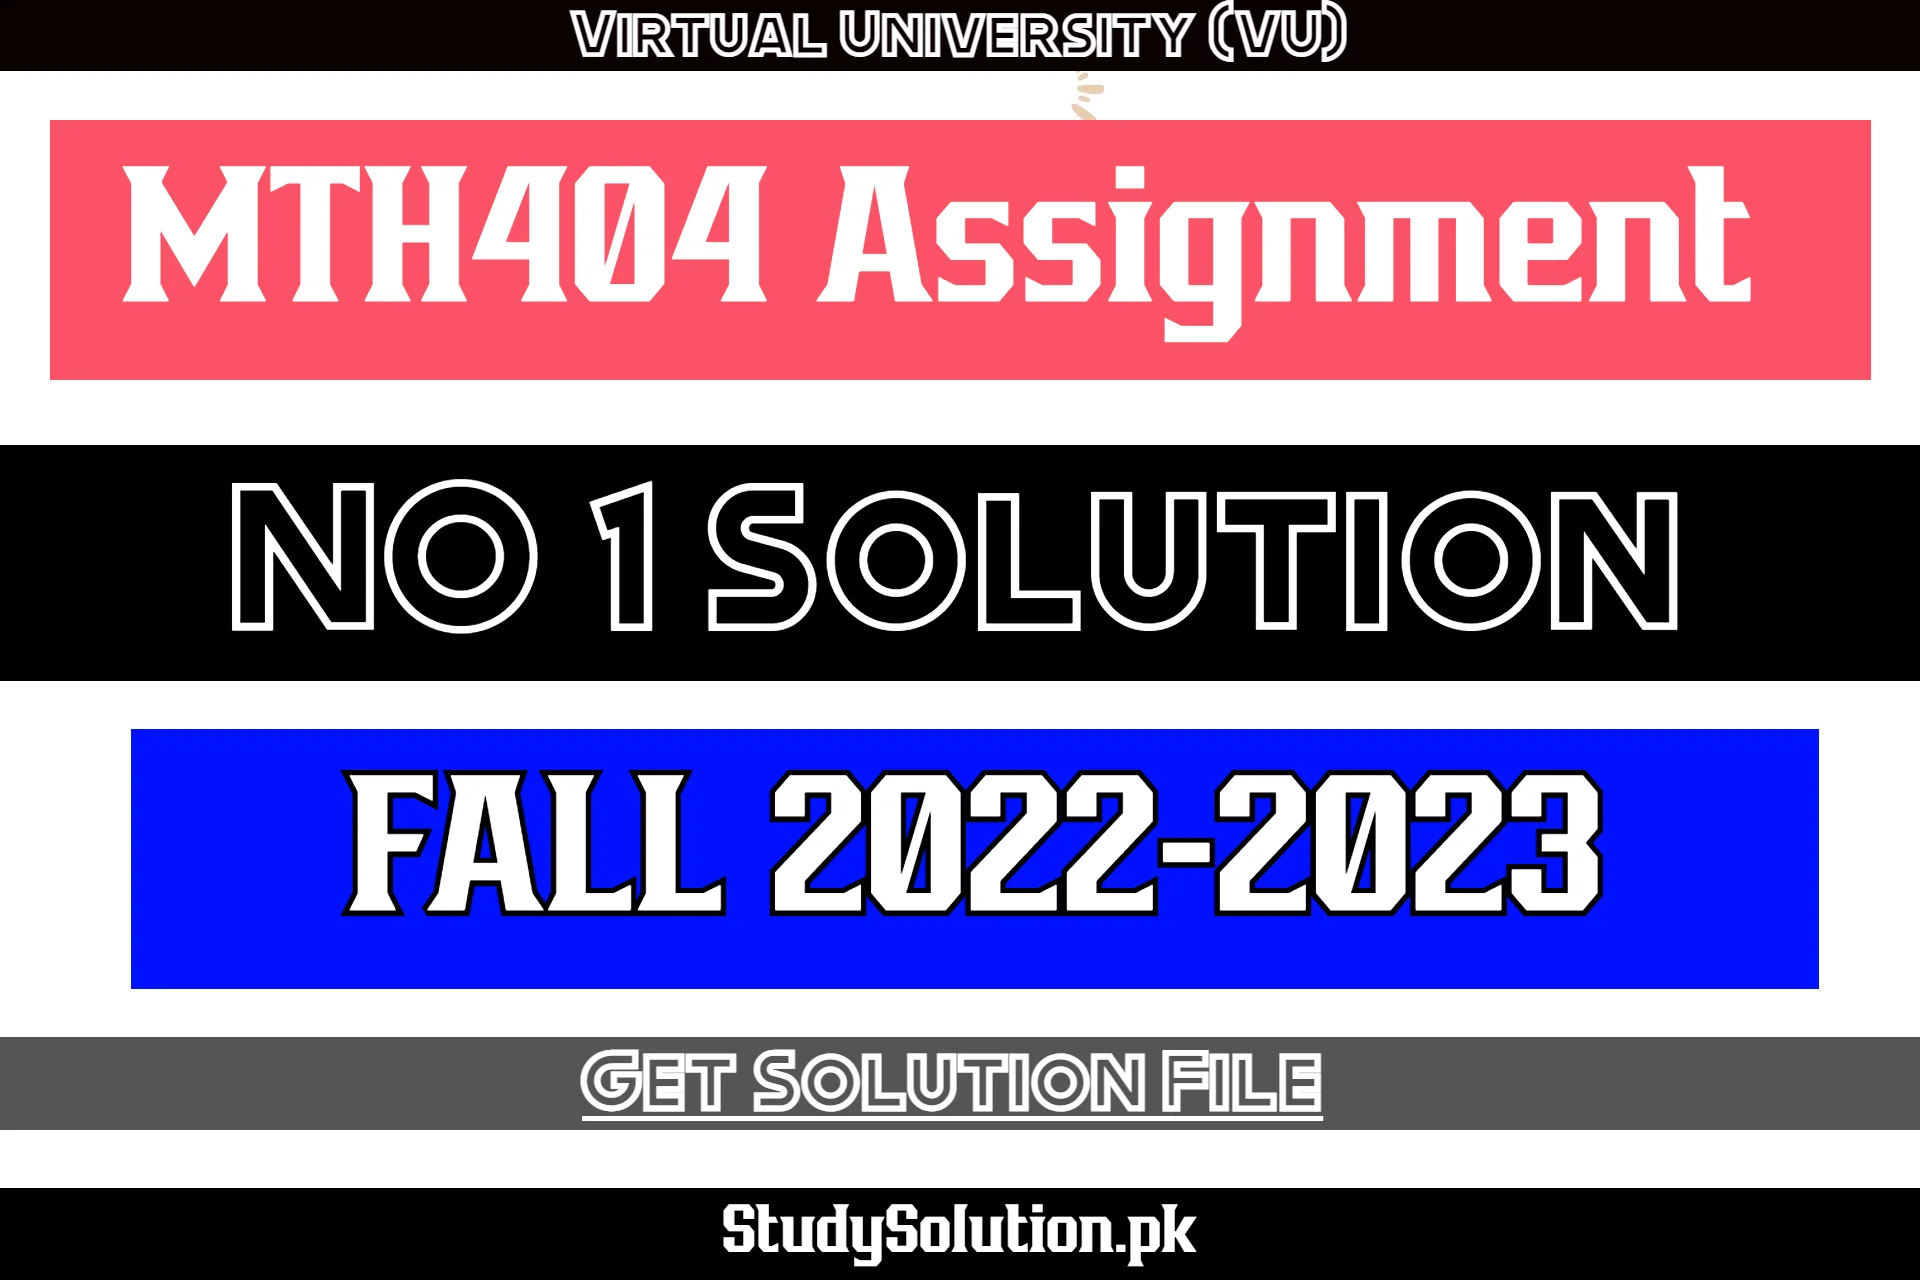 MTH404 Assignment No 1 Solution Fall 2022